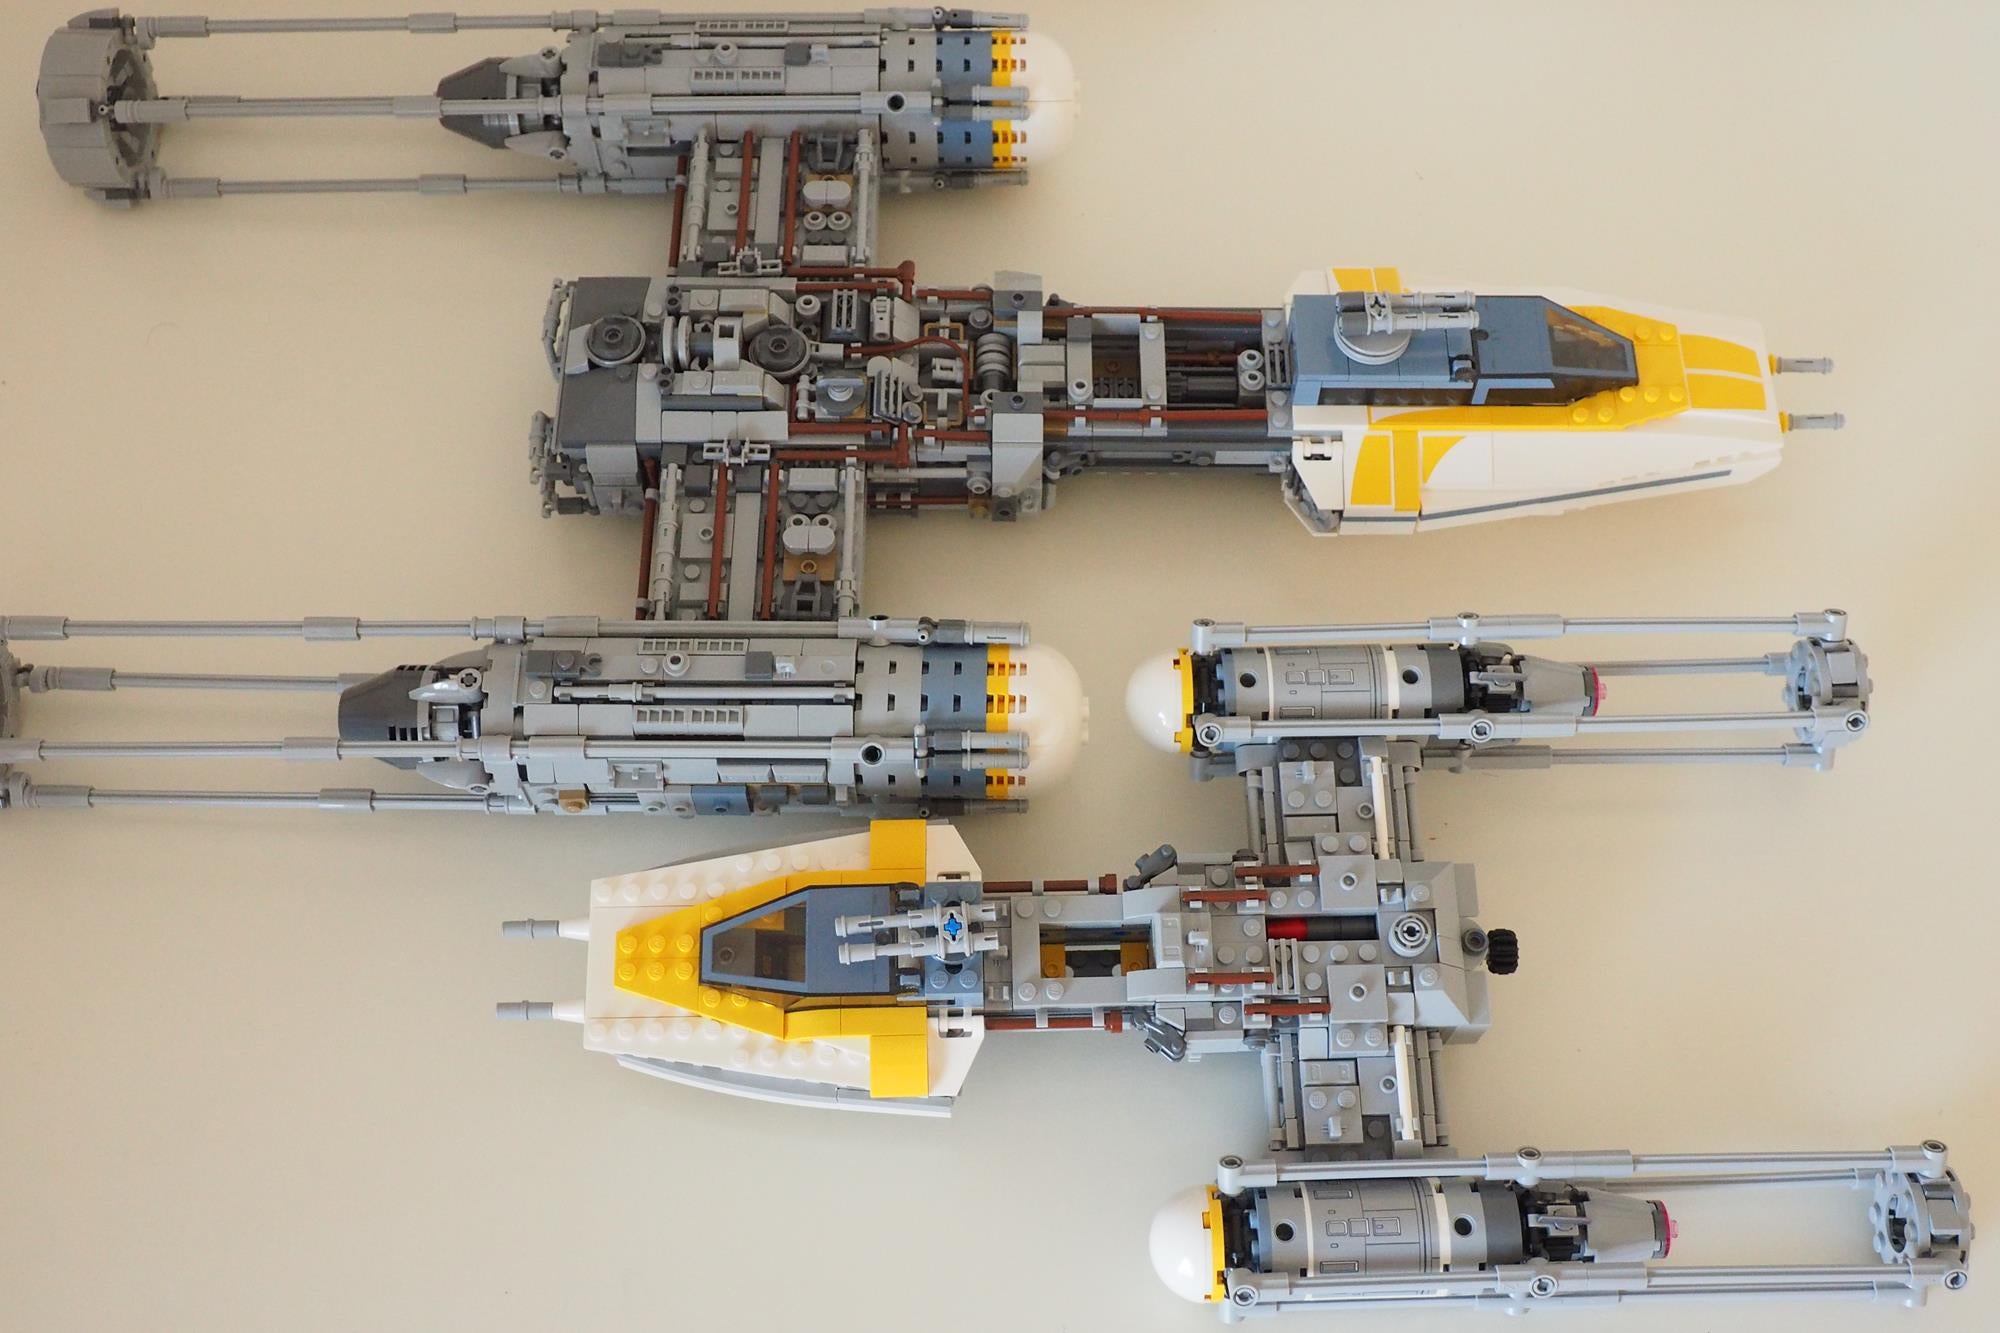 LEGO Star Wars UCS Y-Wing sets from different angles.